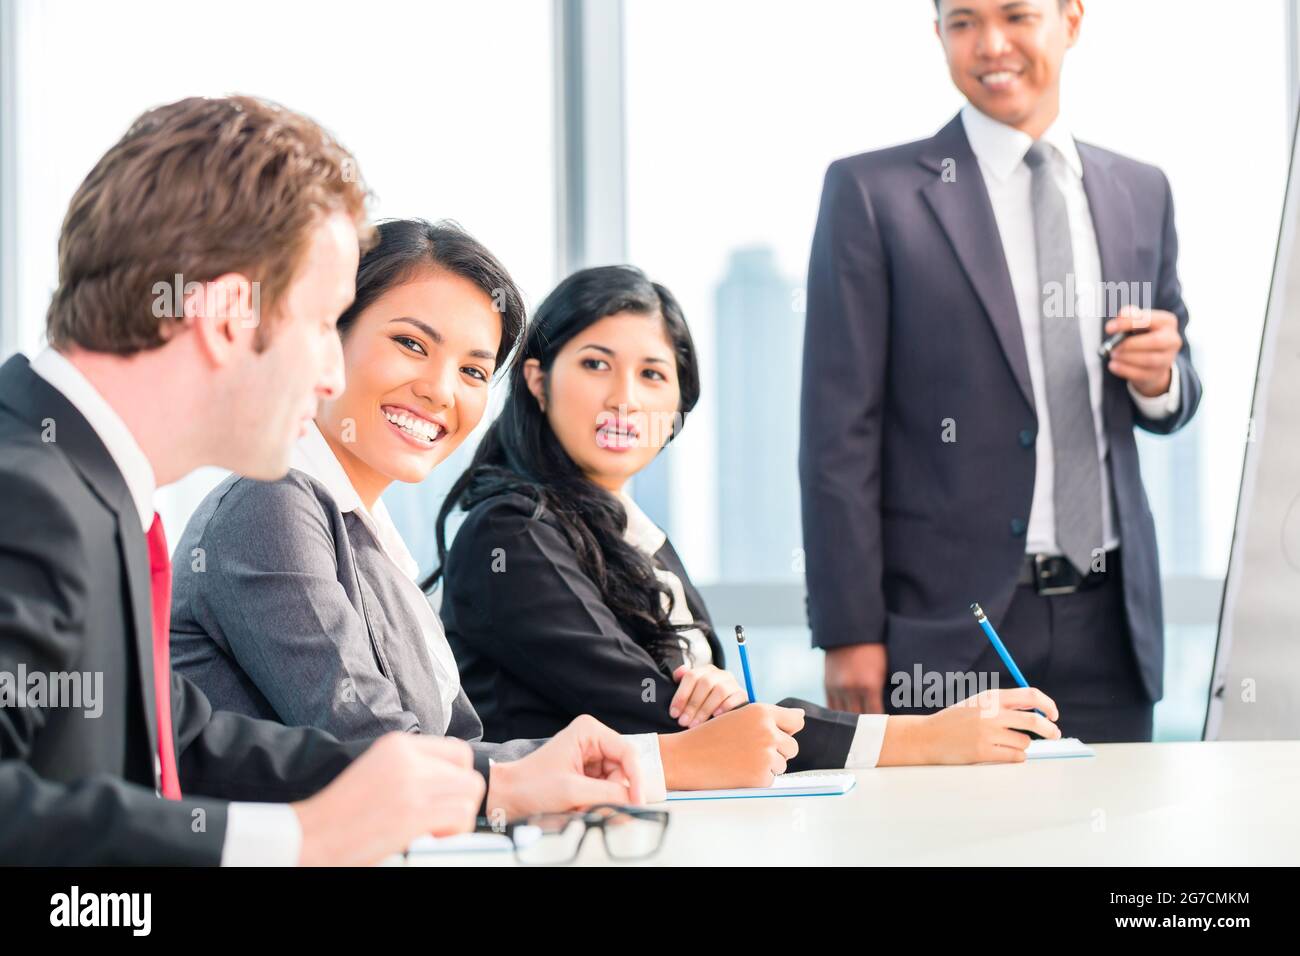 Asian business team in presentation discussing ideas Stock Photo